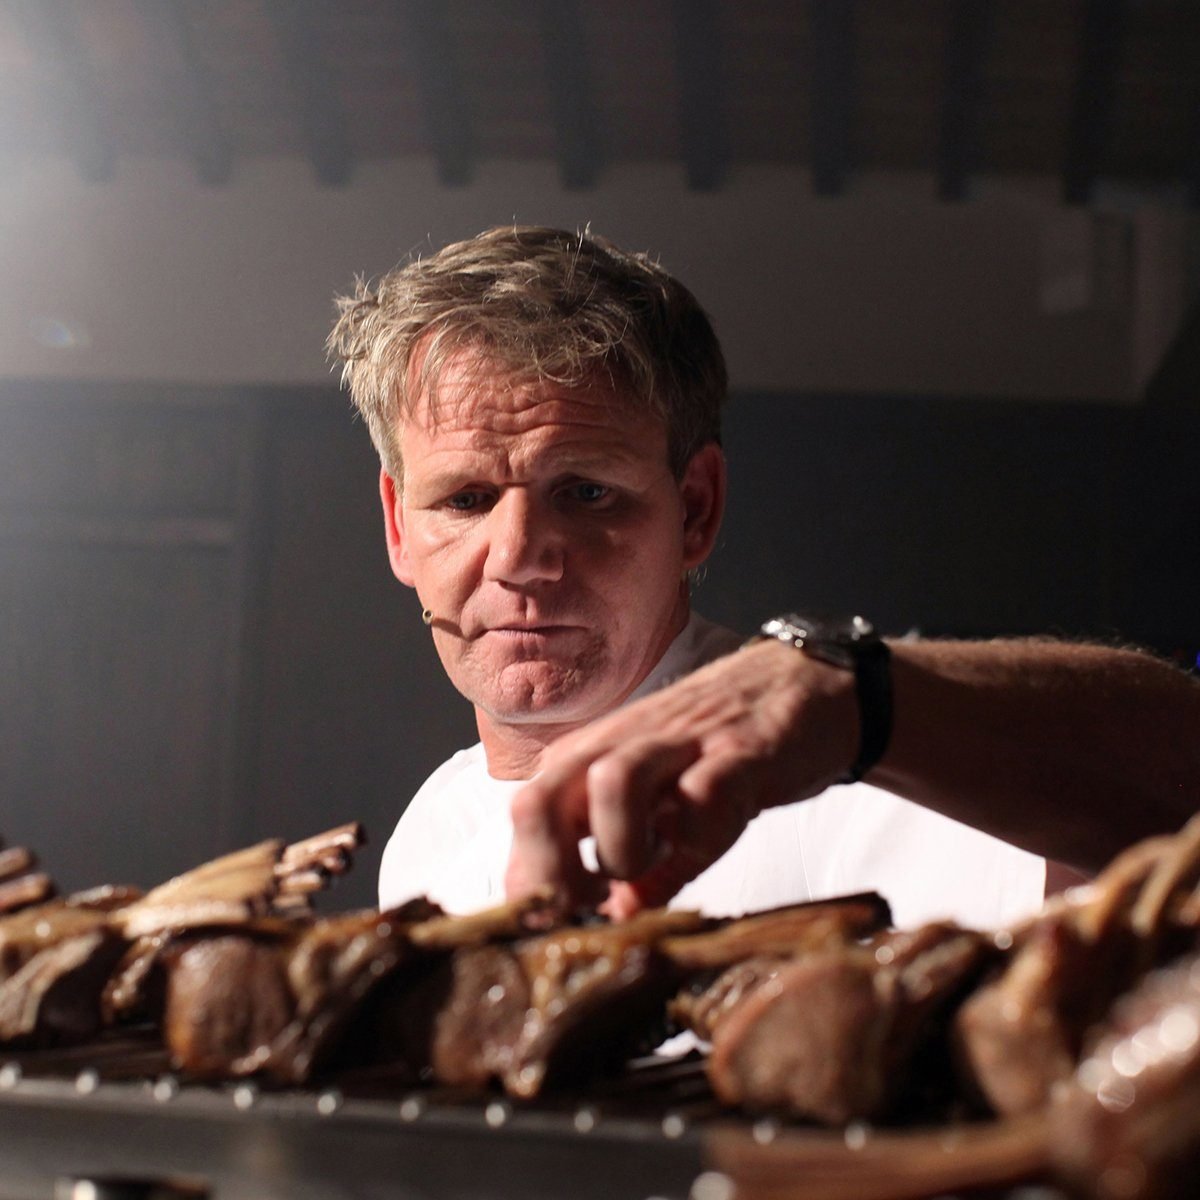 SIENA, ITALY - JULY 05: Scottish chef Gordon Ramsay holds a cooking class at the Castel Monastero Resort on July 5, 2012 in Castel Monastero - Siena, Italy. (Photo by Franco Origlia/Getty Images)